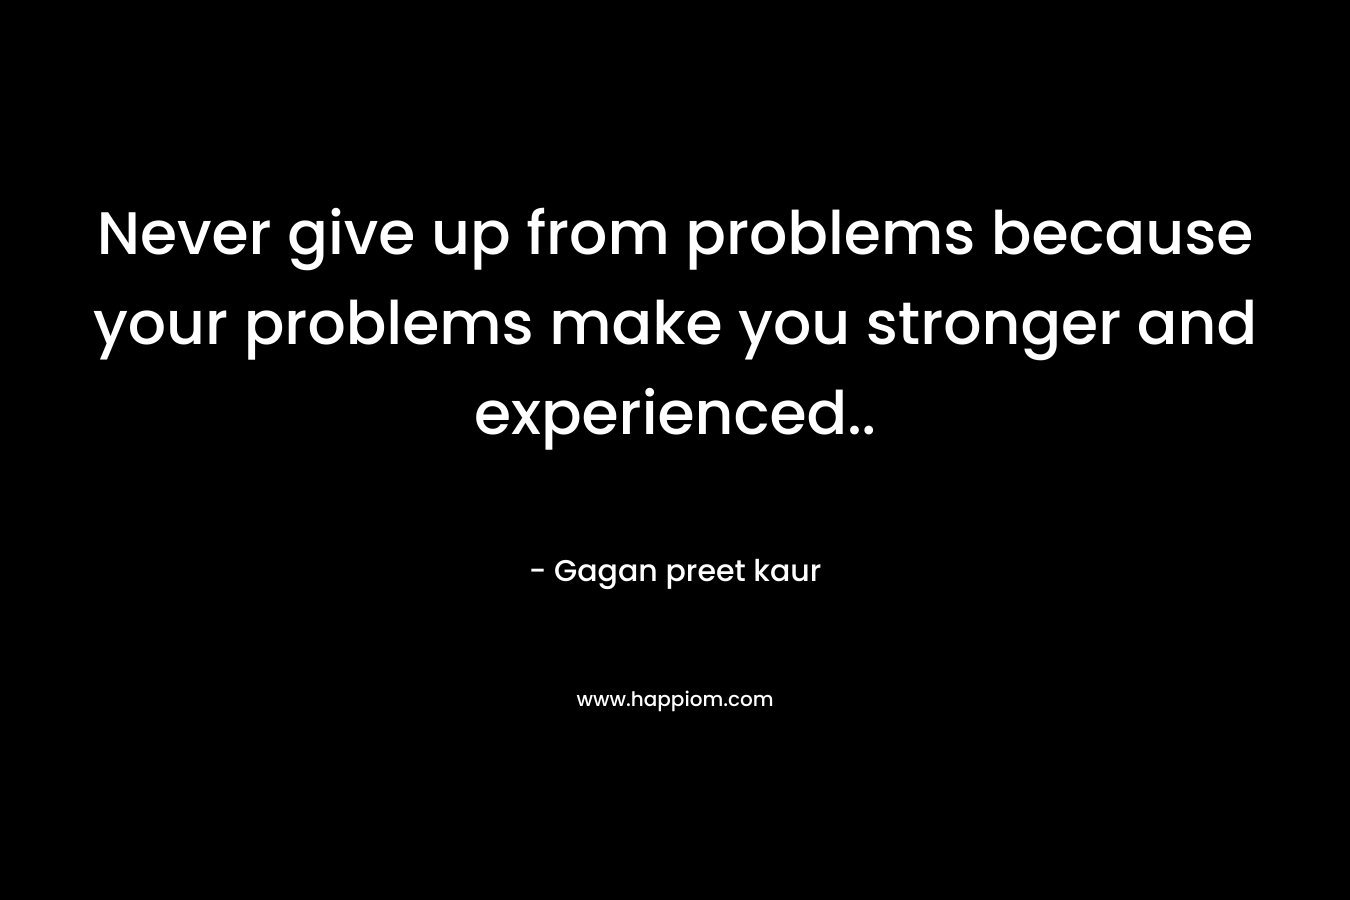 Never give up from problems because your problems make you stronger and experienced..